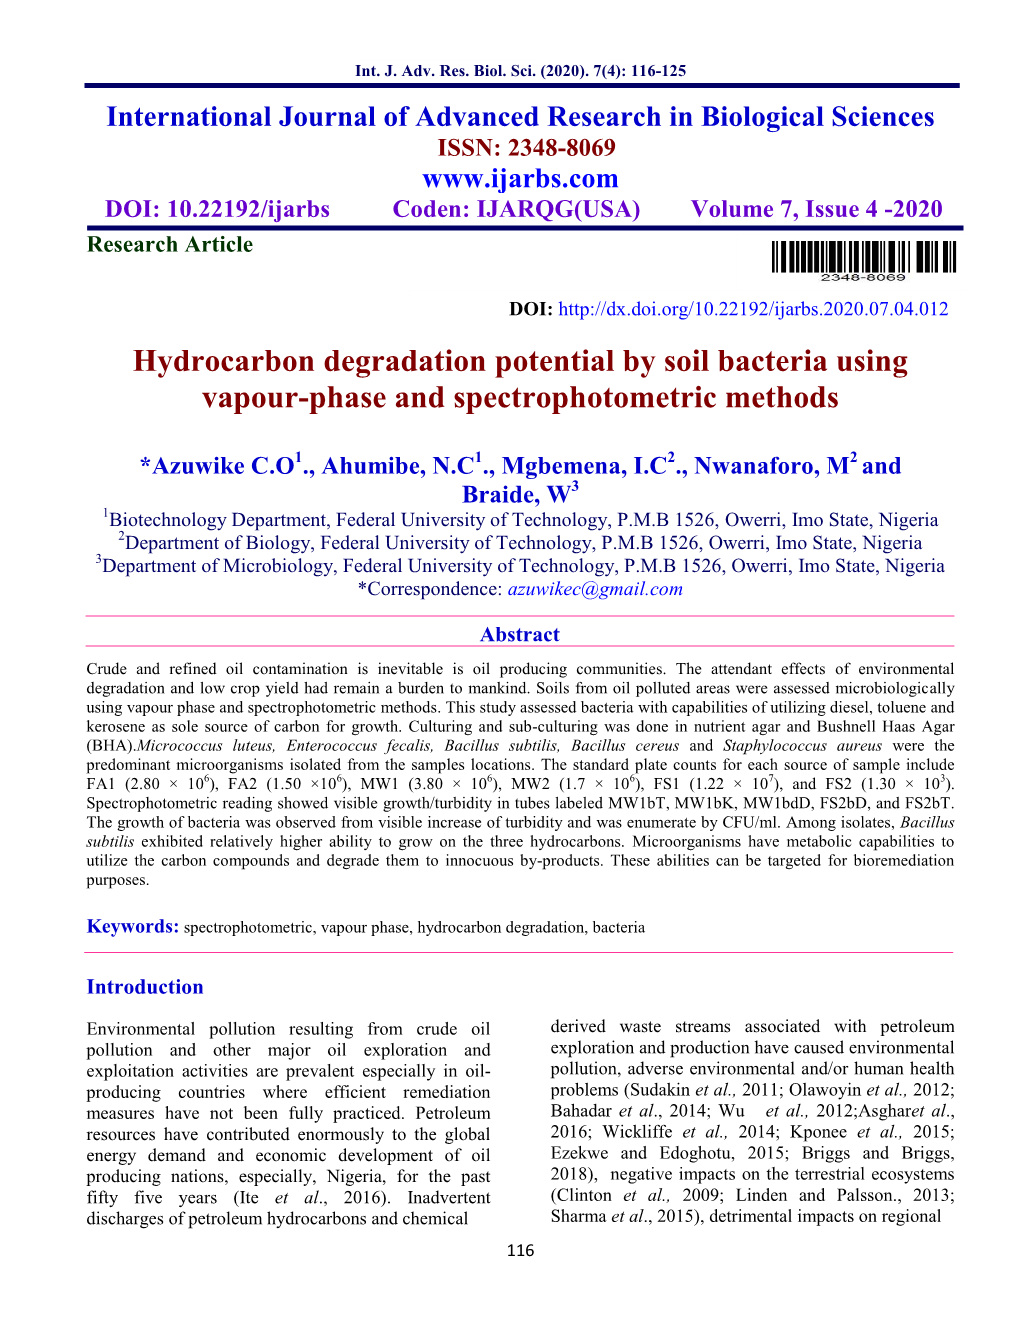 Hydrocarbon Degradation Potential by Soil Bacteria Using Vapour-Phase and Spectrophotometric Methods